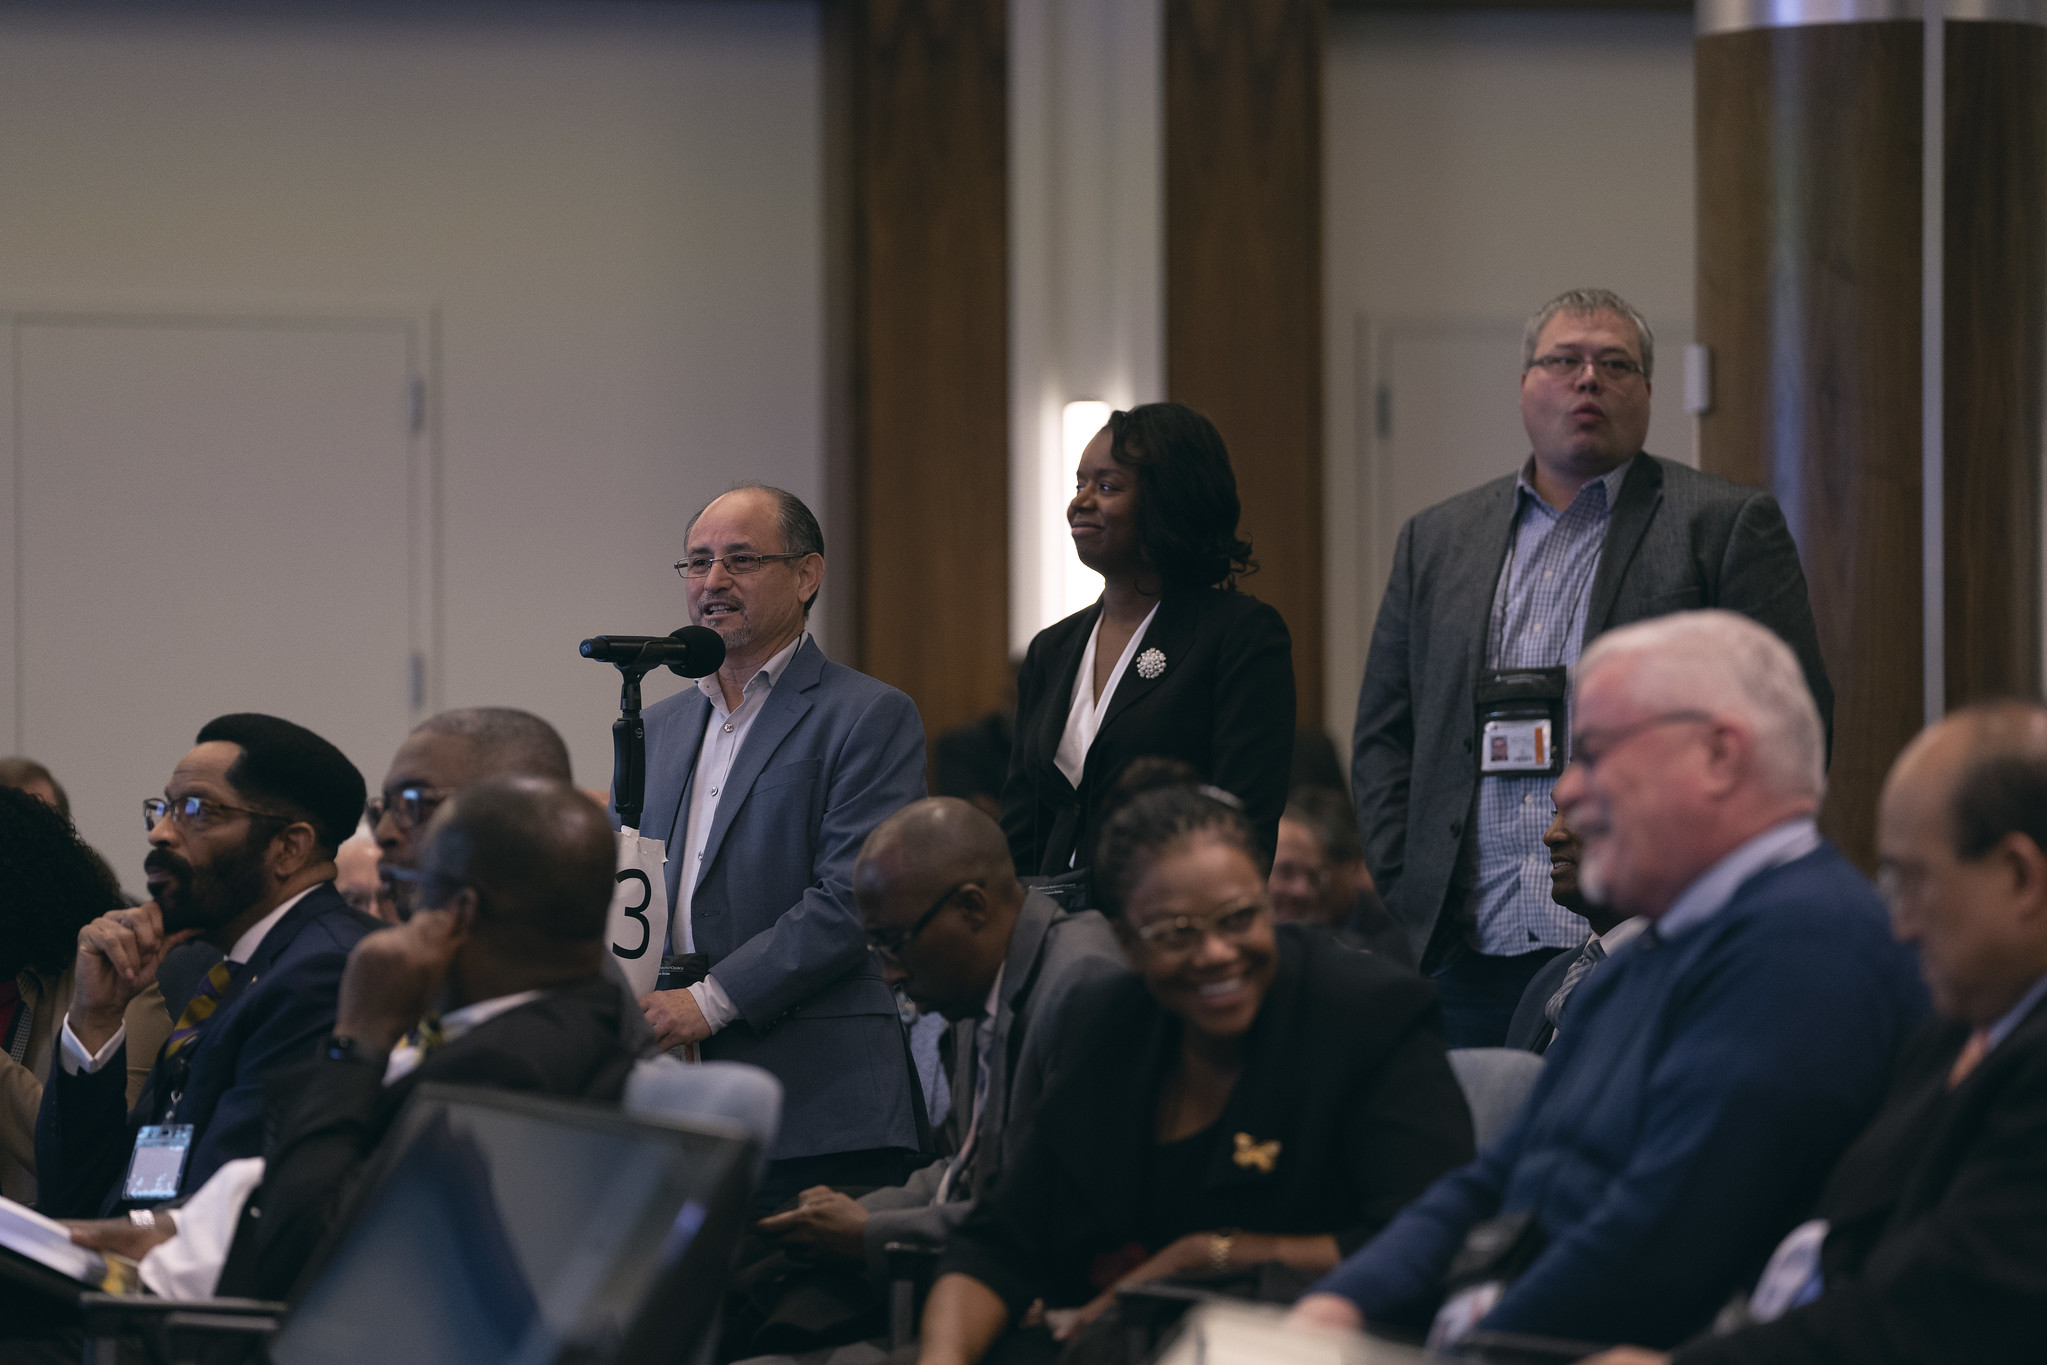 Executive committee members line up to comment on NAD Year-End Meeting reports on Nov. 4, 2019. Photo by Dan Weber